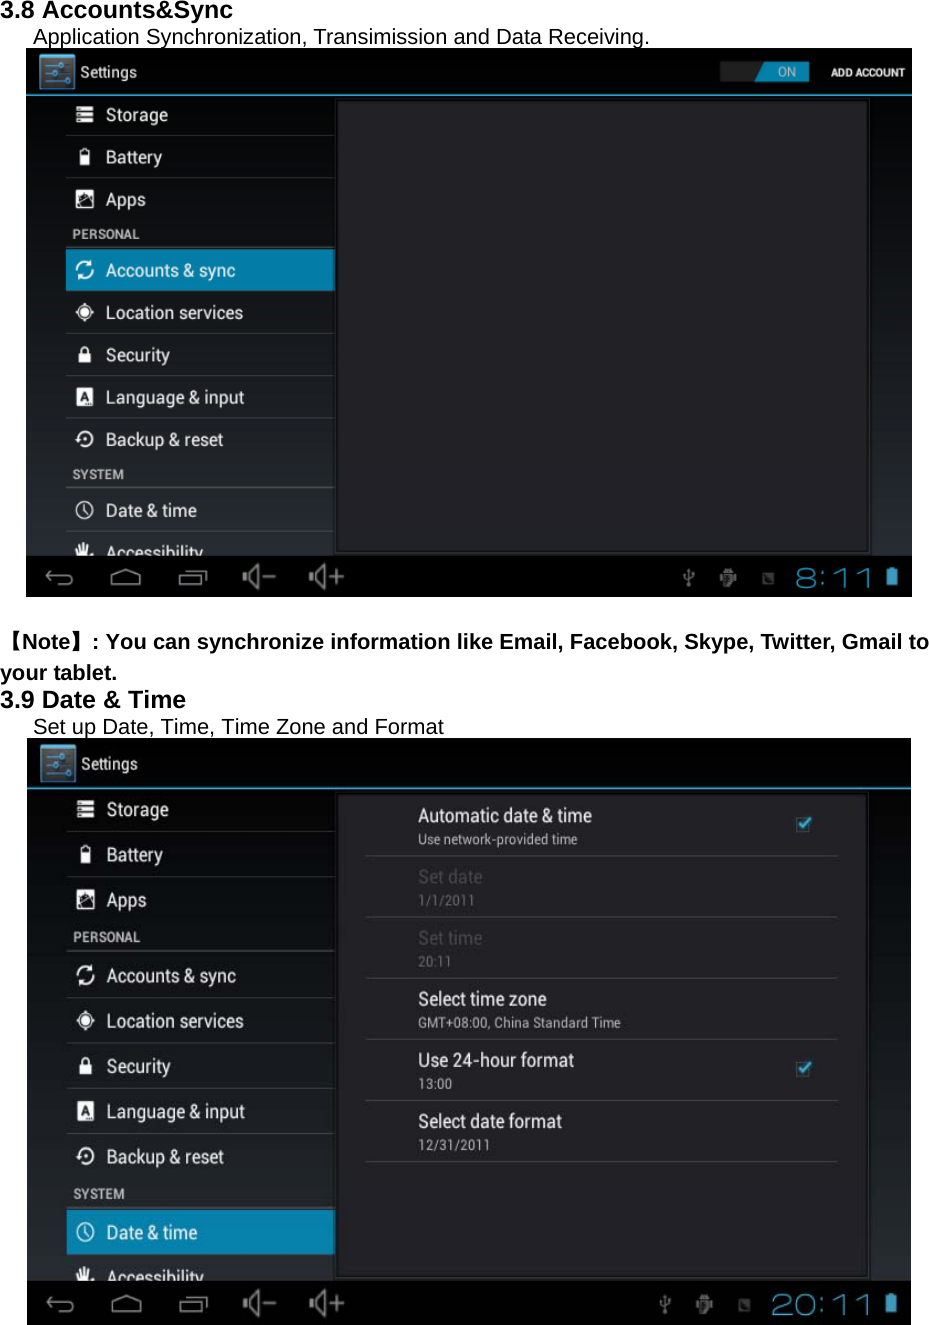  3.8 Accounts&amp;Sync   Application Synchronization, Transimission and Data Receiving.     【Note】: You can synchronize information like Email, Facebook, Skype, Twitter, Gmail to your tablet. 3.9 Date &amp; Time   Set up Date, Time, Time Zone and Format  